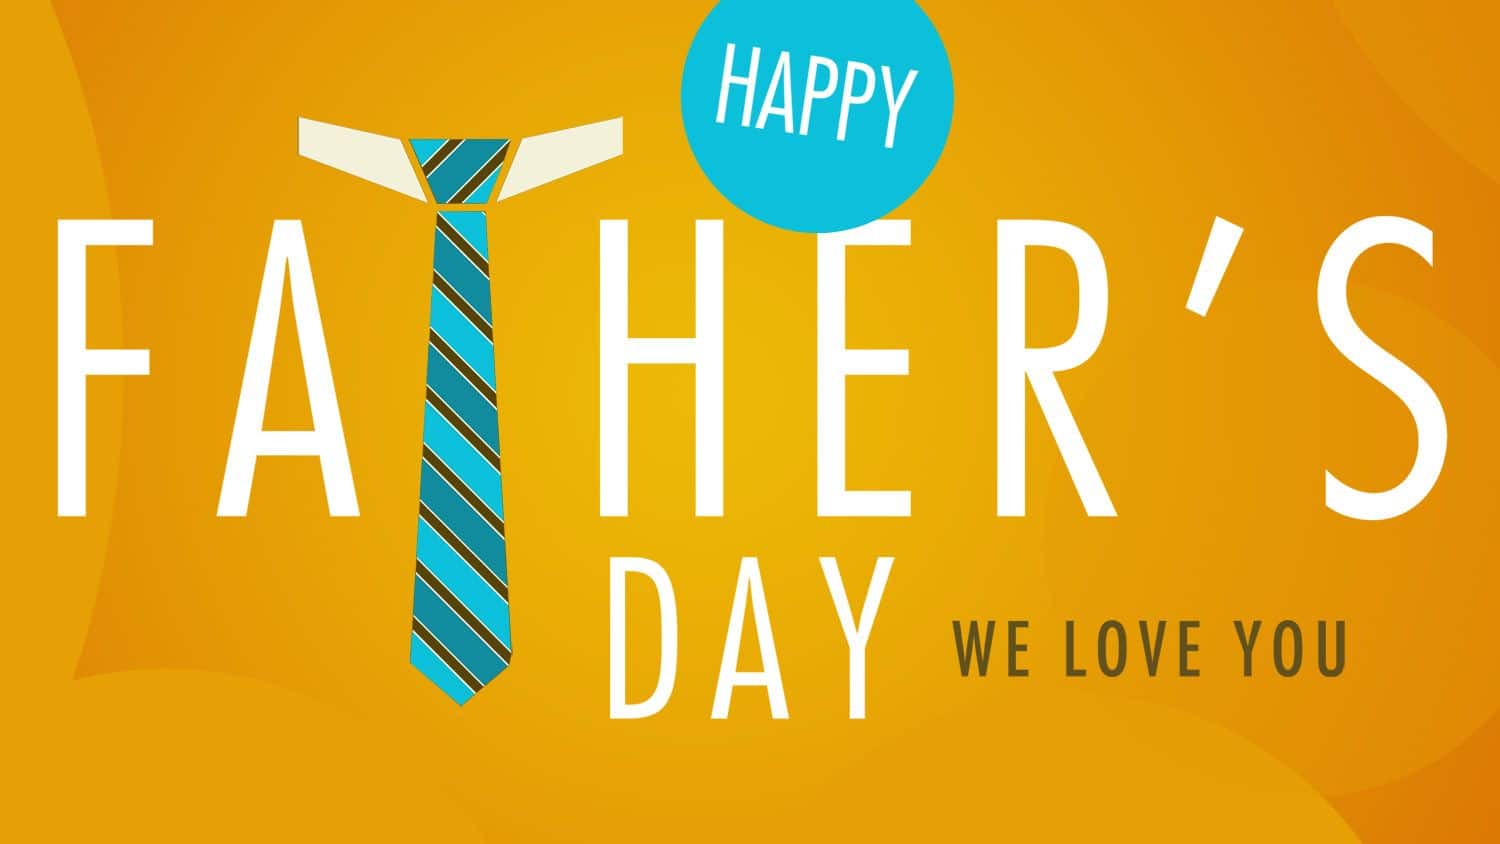 Fathers Day Wallpaper 2020